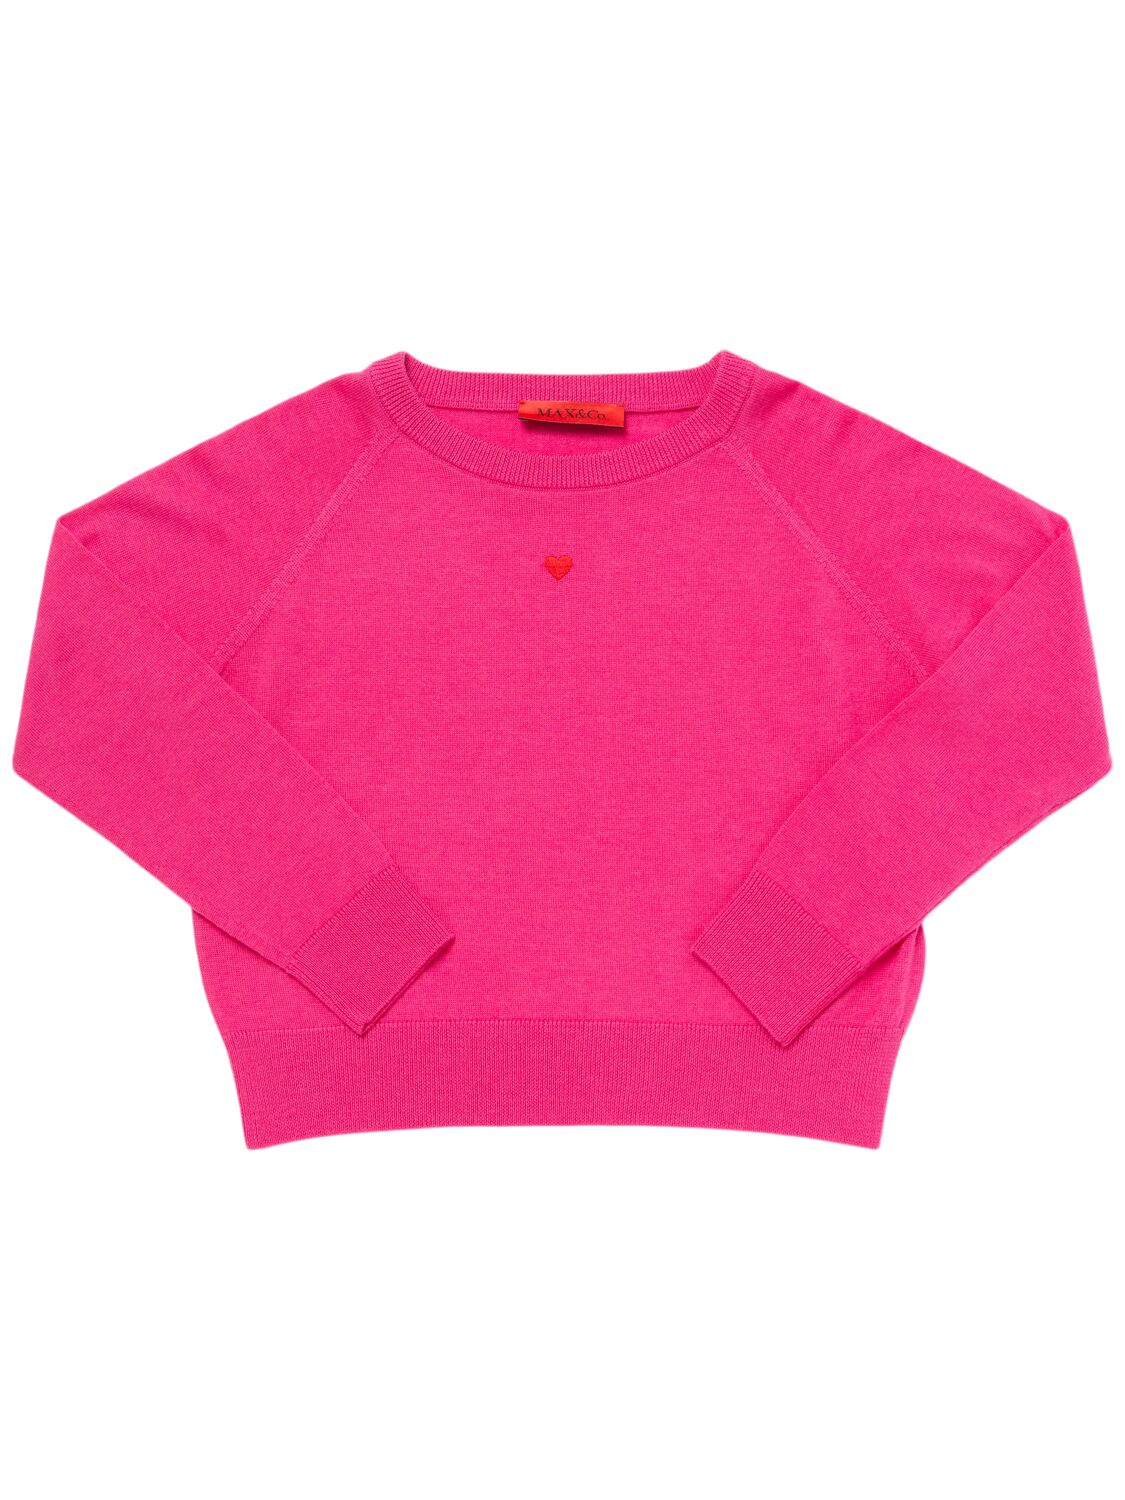 Max & Co Wool Knit Sweater In Pink